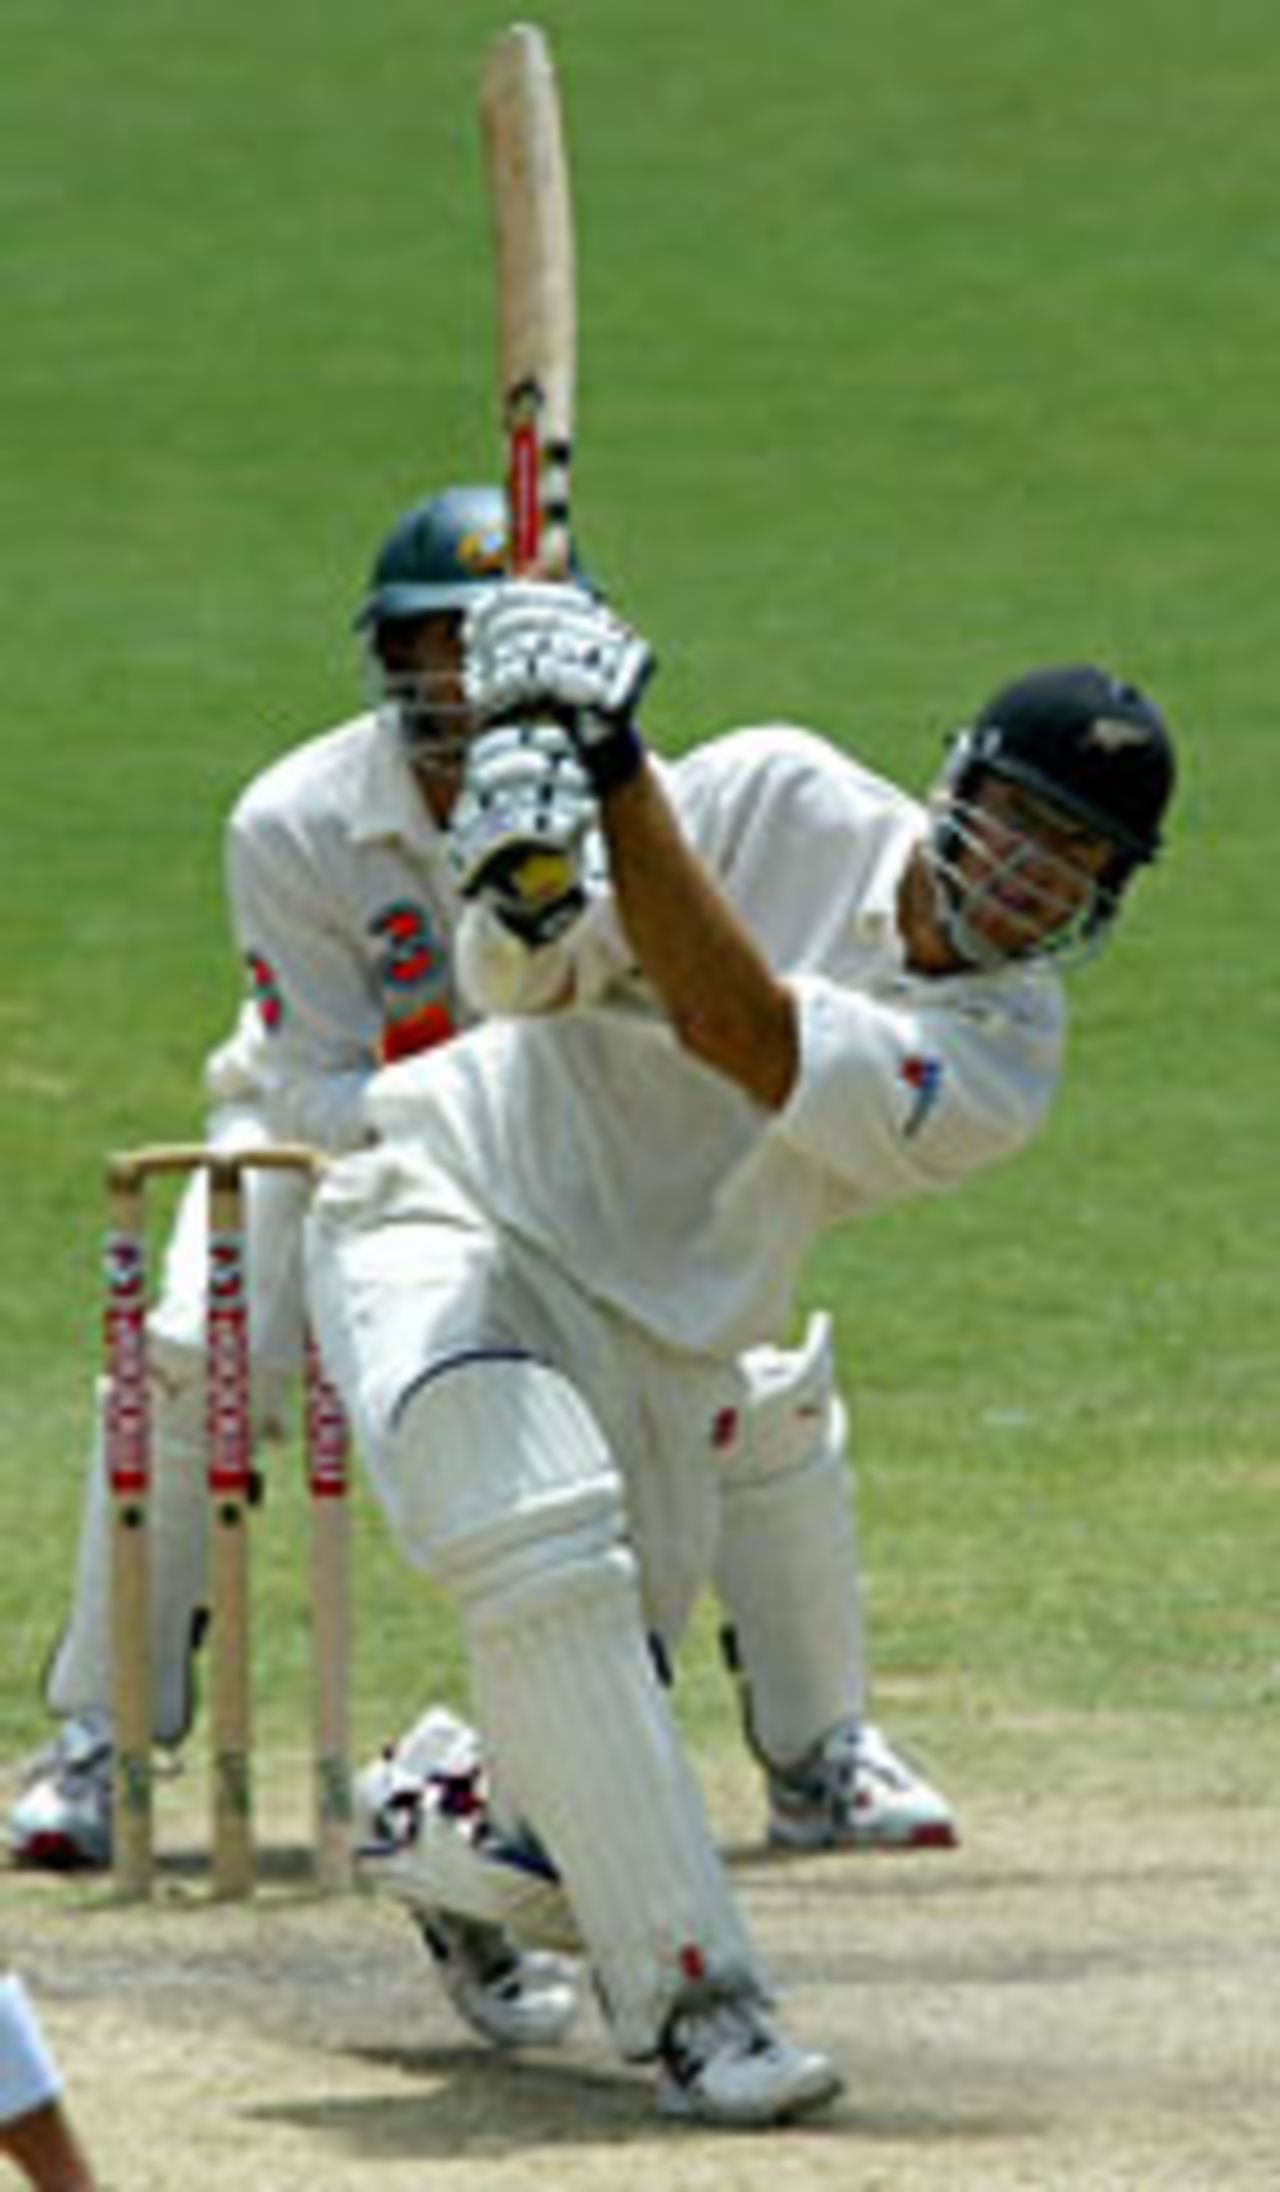 Daniel Vettori hits out on his way to 59, Australia v New Zealand, 2nd Test, Adelaide, November 30, 2004